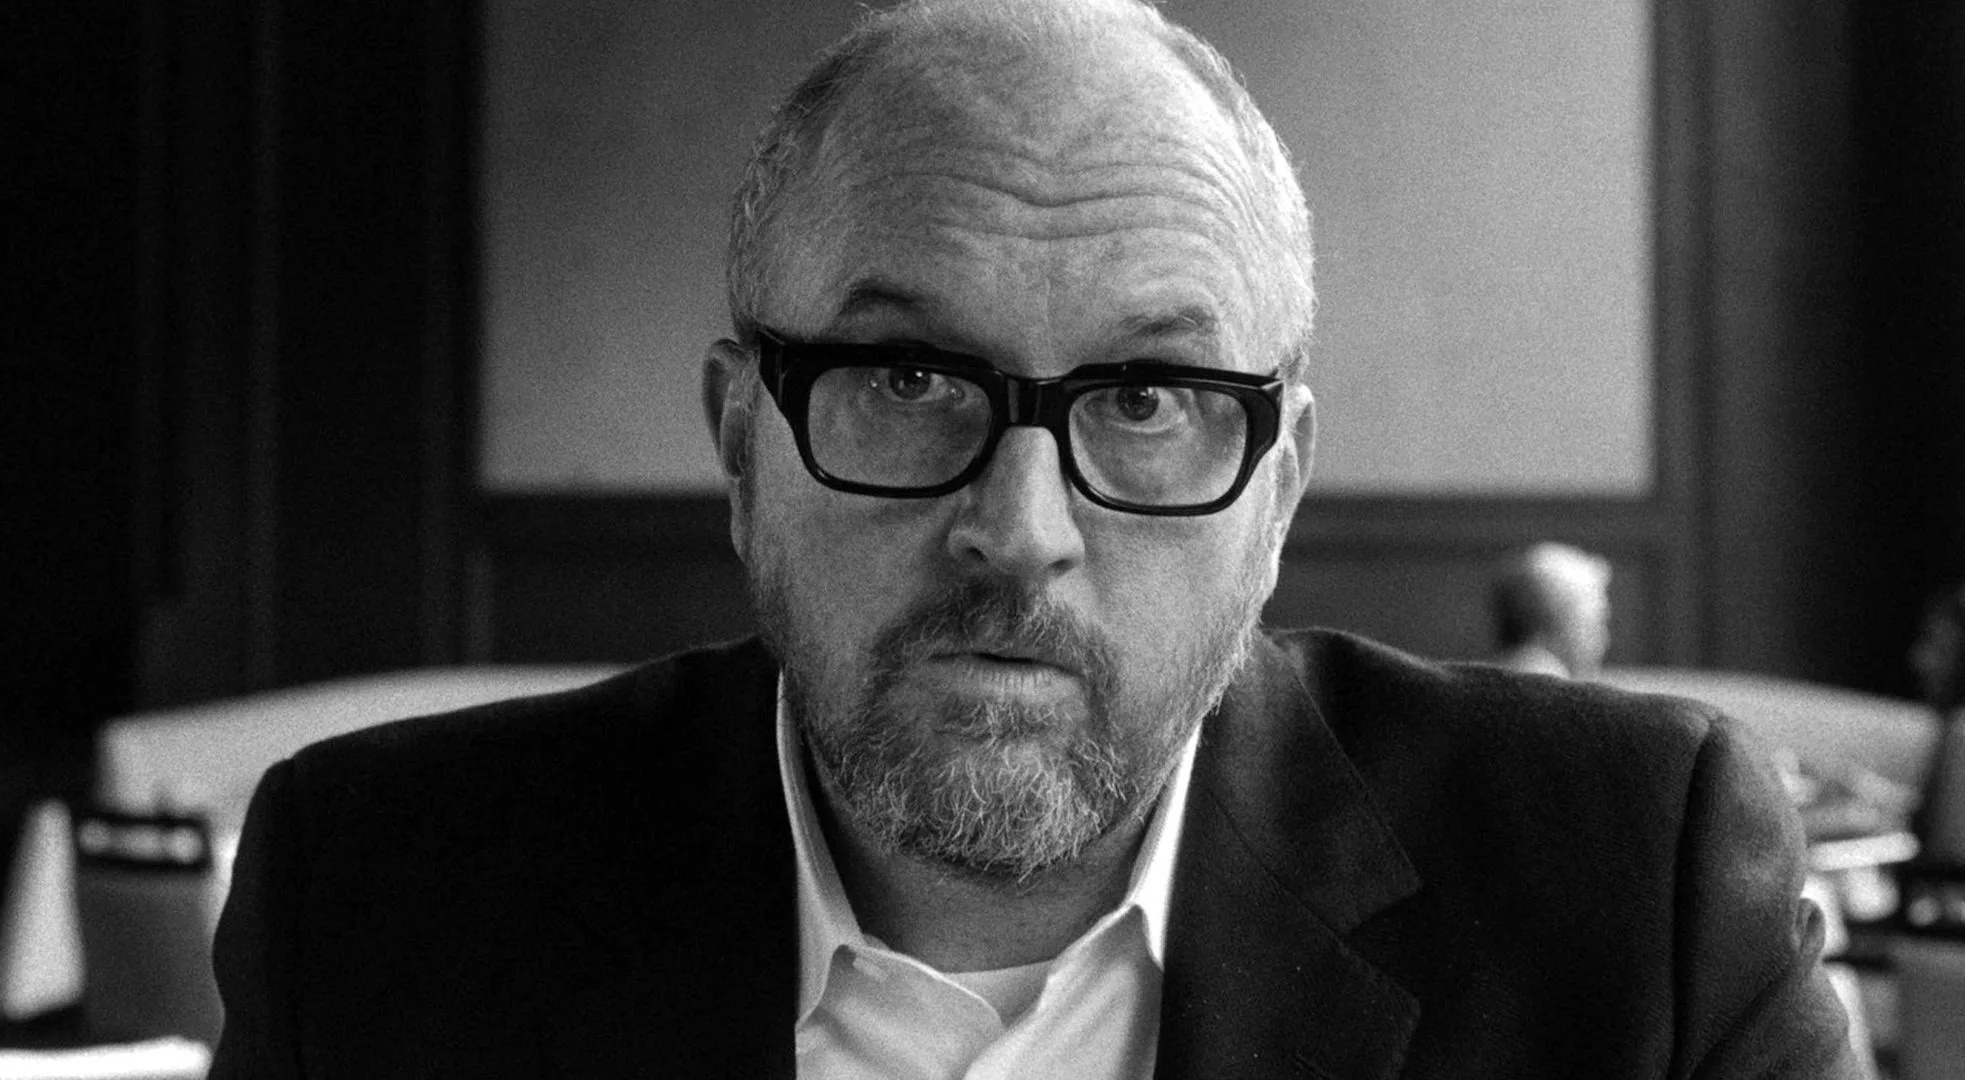 Louis C.K., Black and white cringe, Indiewire review, Comedy masterpiece, 1970x1080 HD Desktop